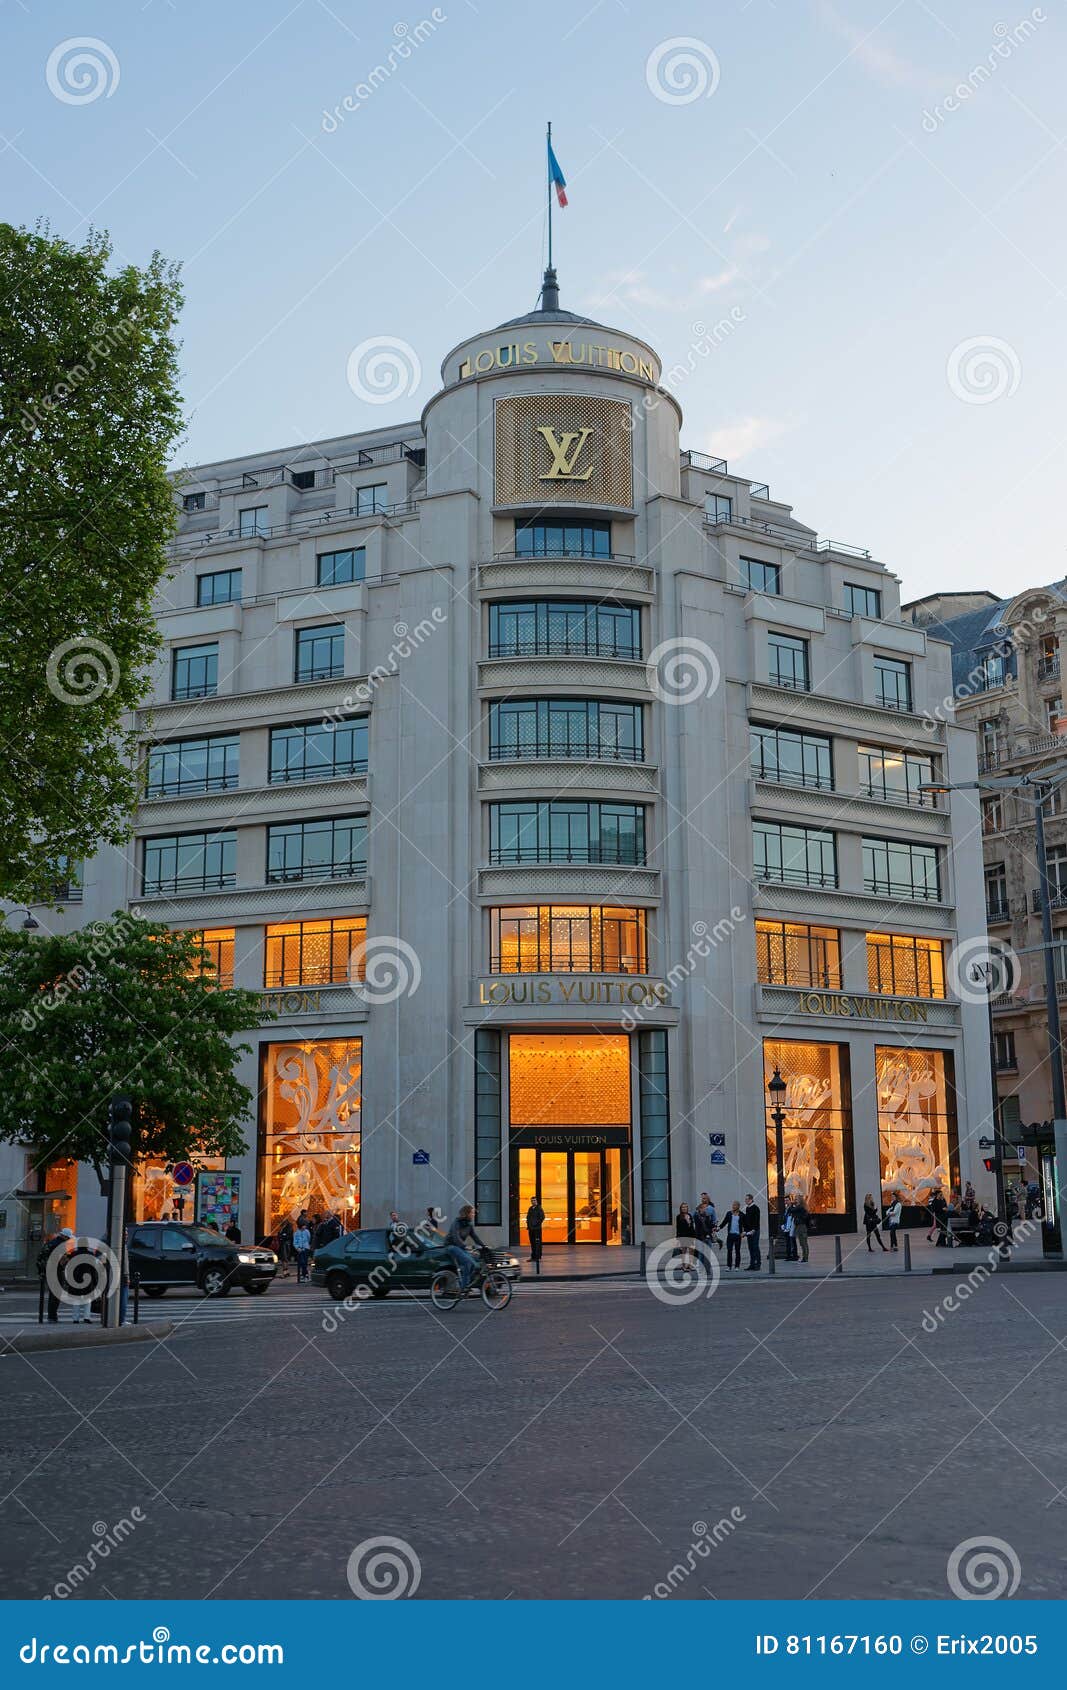 The Louis Vuitton Store Building On The Champs Elysees In Paris